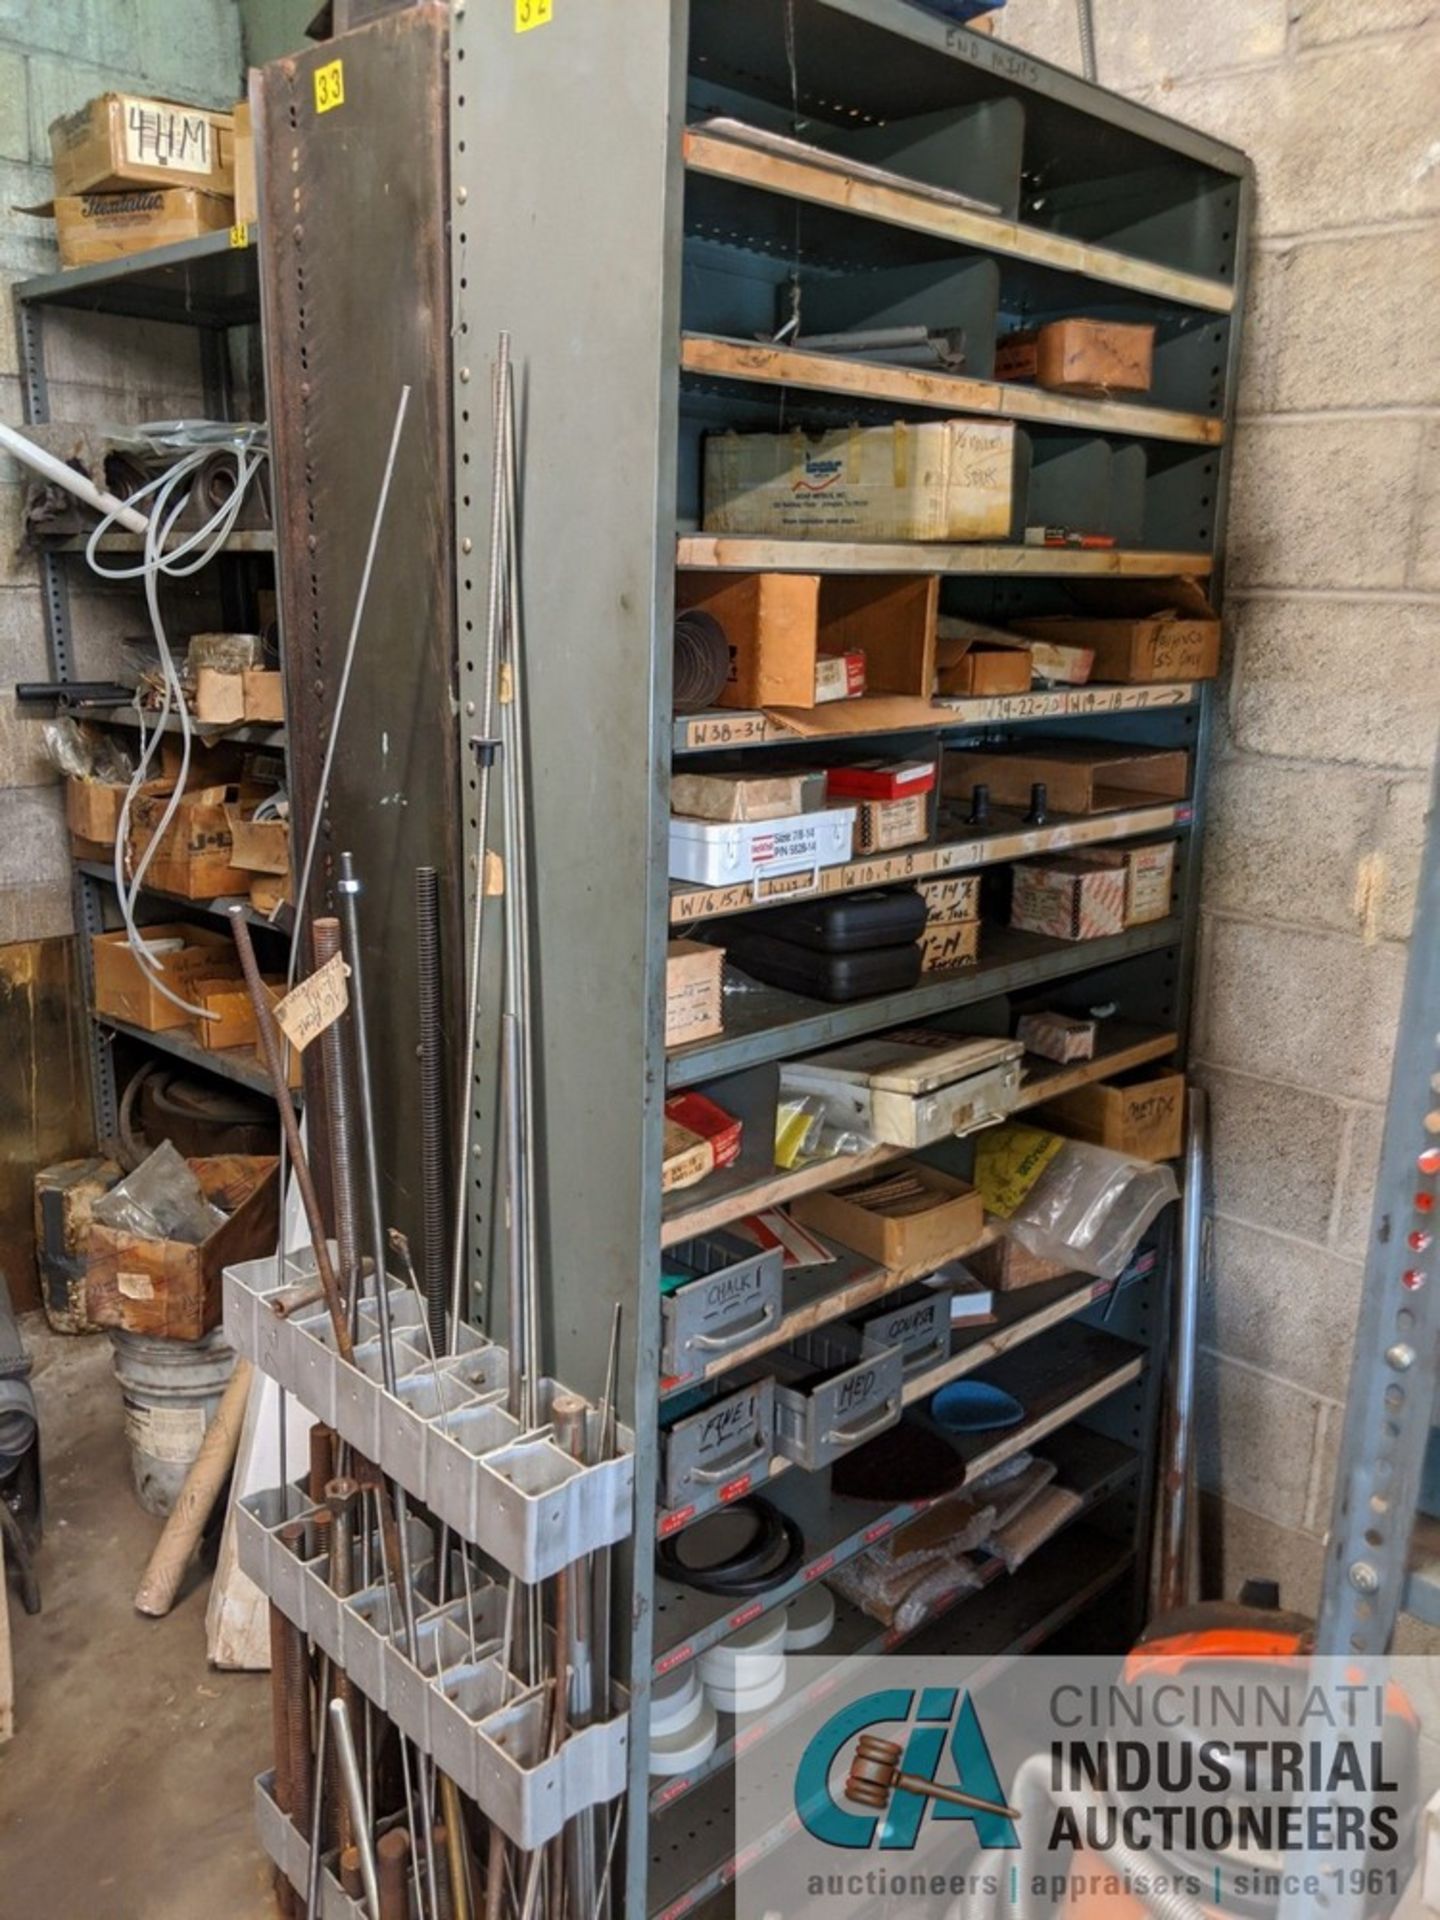 (LOT) CONTENTS OF ROOM: SHELVING UNITS WITH HARDWARE, GRINDING WHEELS, ALL THREAD, MACHINE PARTS, - Image 4 of 12